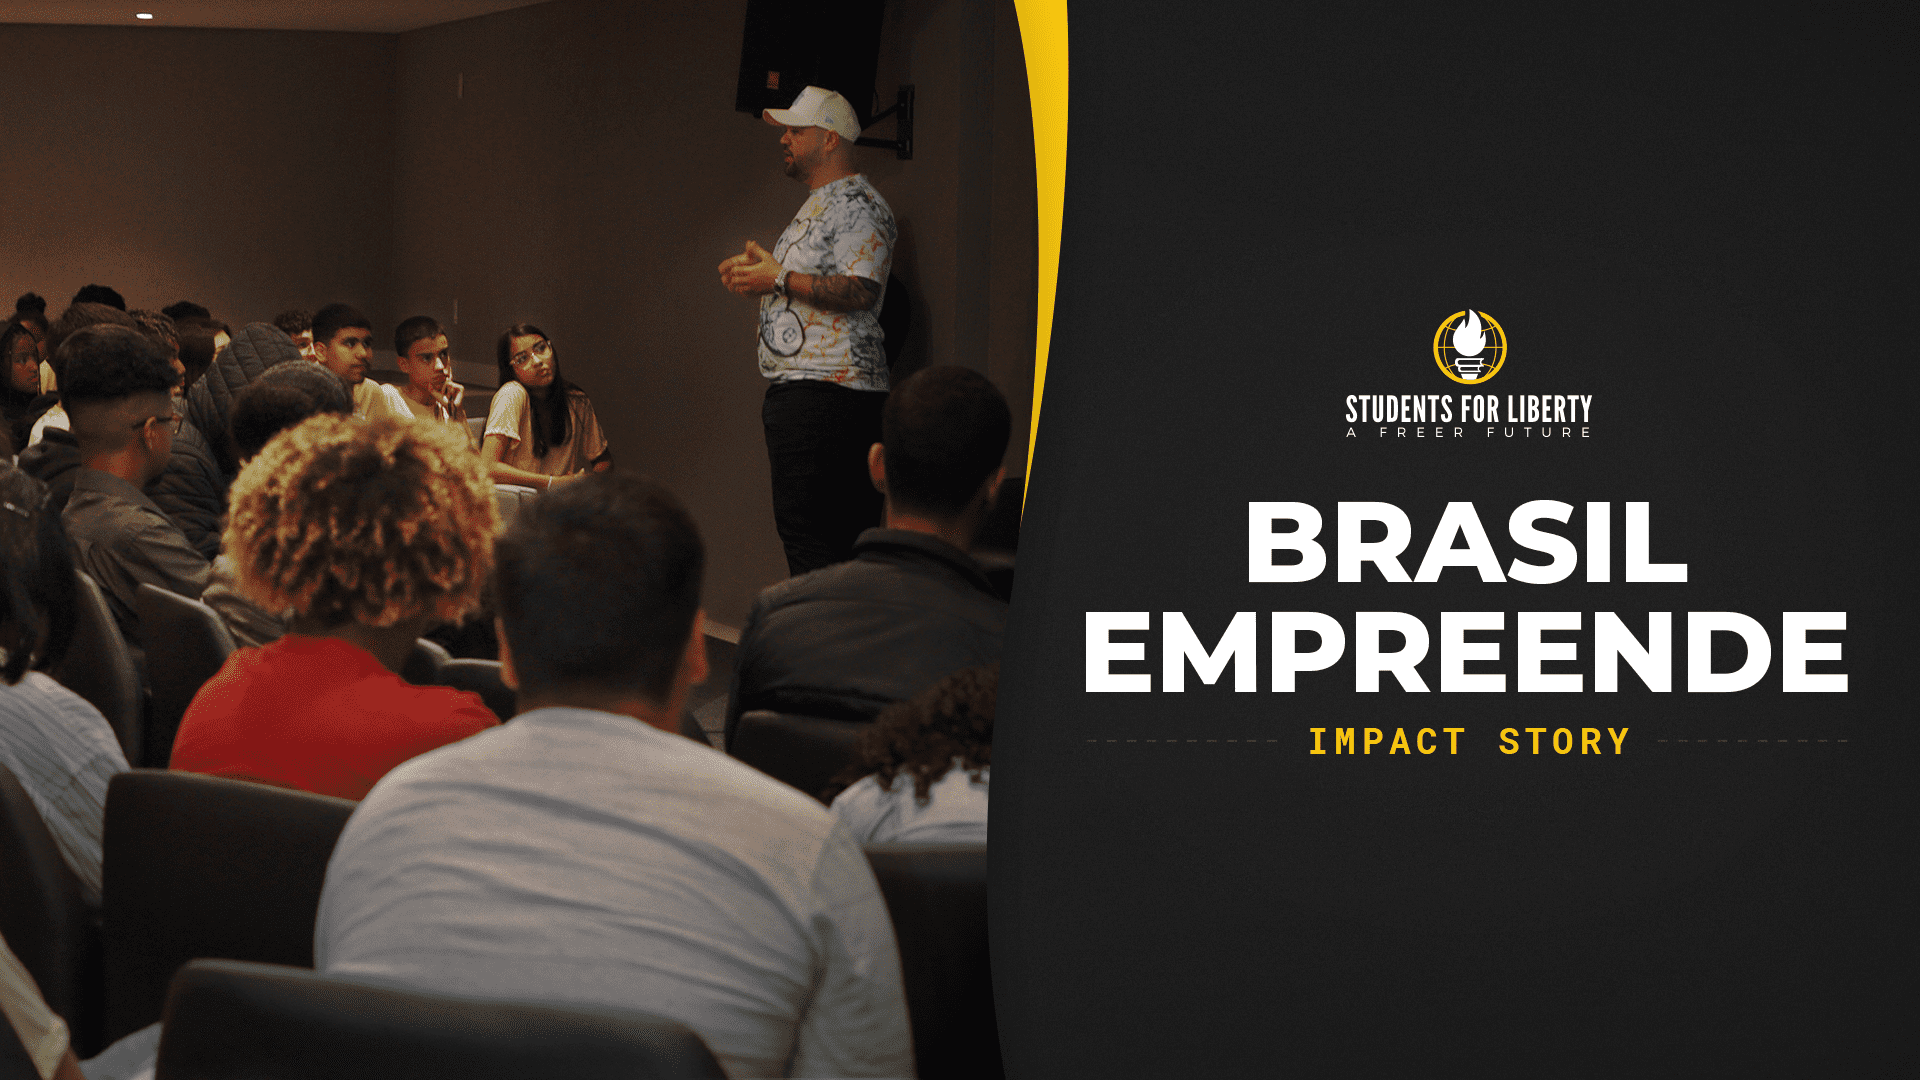 Brasil Empreende has greatly impacted the lives of 1,725 schoolchildren from the most disadvantaged neighborhoods in Rio de Janeiro, Brazil, by providing them with entrepreneurship classes that are essential to their chances of breaking the cycle of poverty.